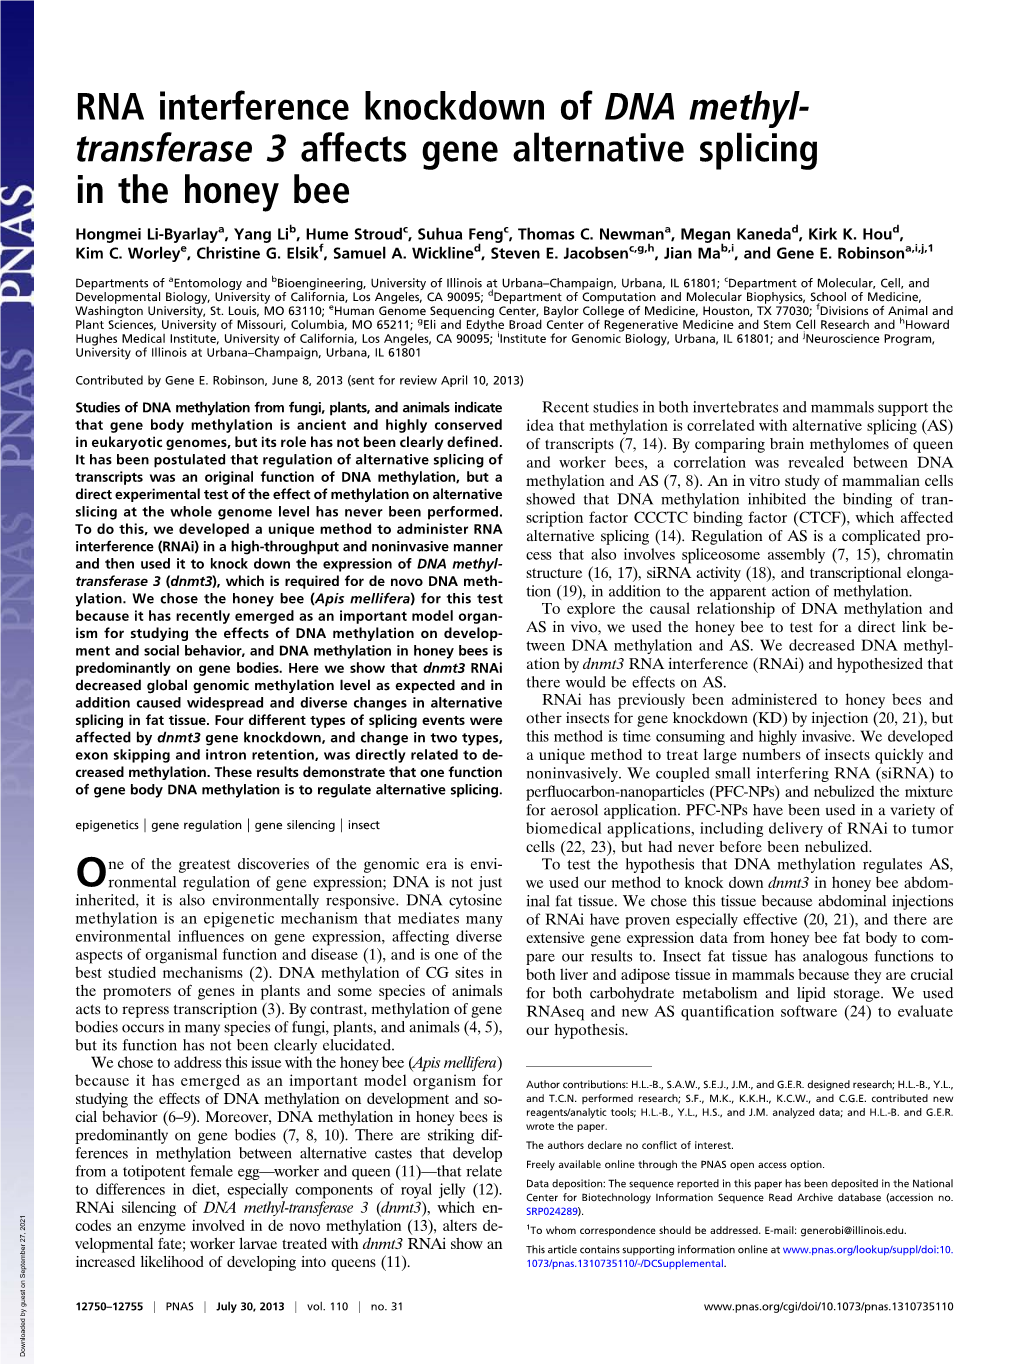 RNA Interference Knockdown of DNA Methyl- Transferase 3 Affects Gene Alternative Splicing in the Honey Bee